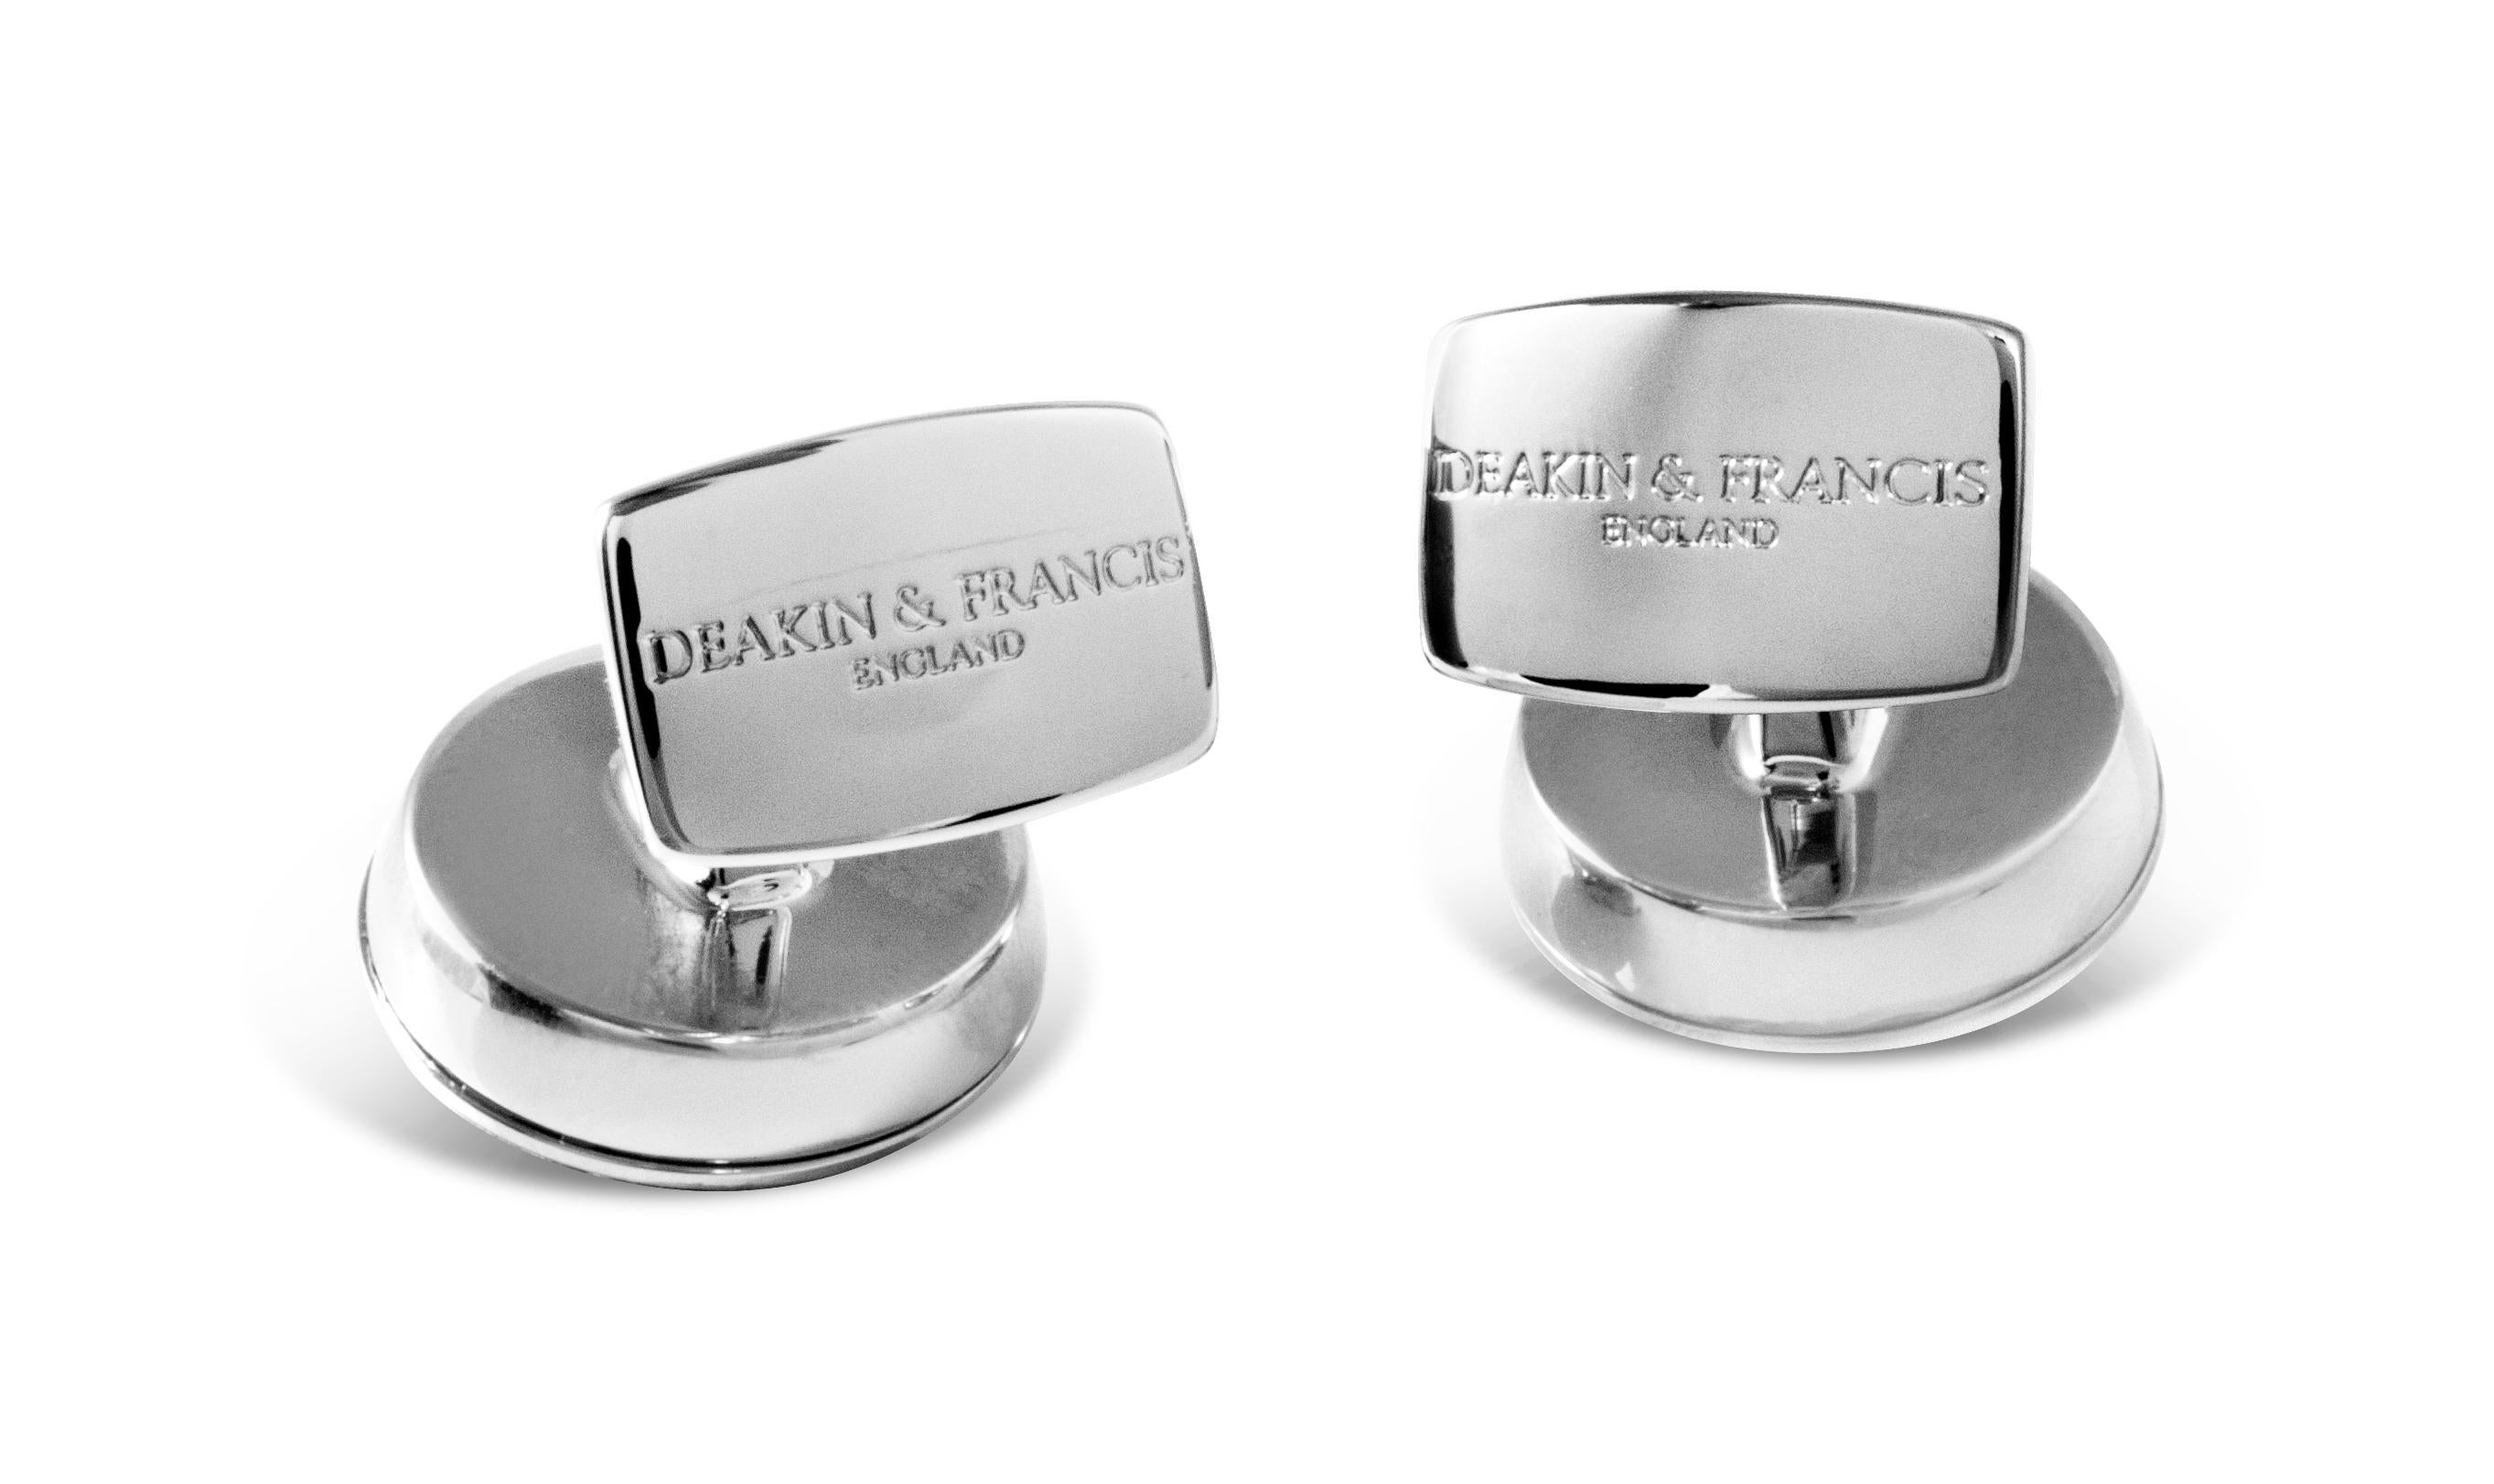 DEAKIN & FRANCIS, Piccadilly Arcade, London

Twist and turn the outer rim of these edgy little cufflinks and watch as the cogs smoothly rotate and turn.

Each cog has been wire cut to ensure a perfectly smooth interlocking function. With no cast